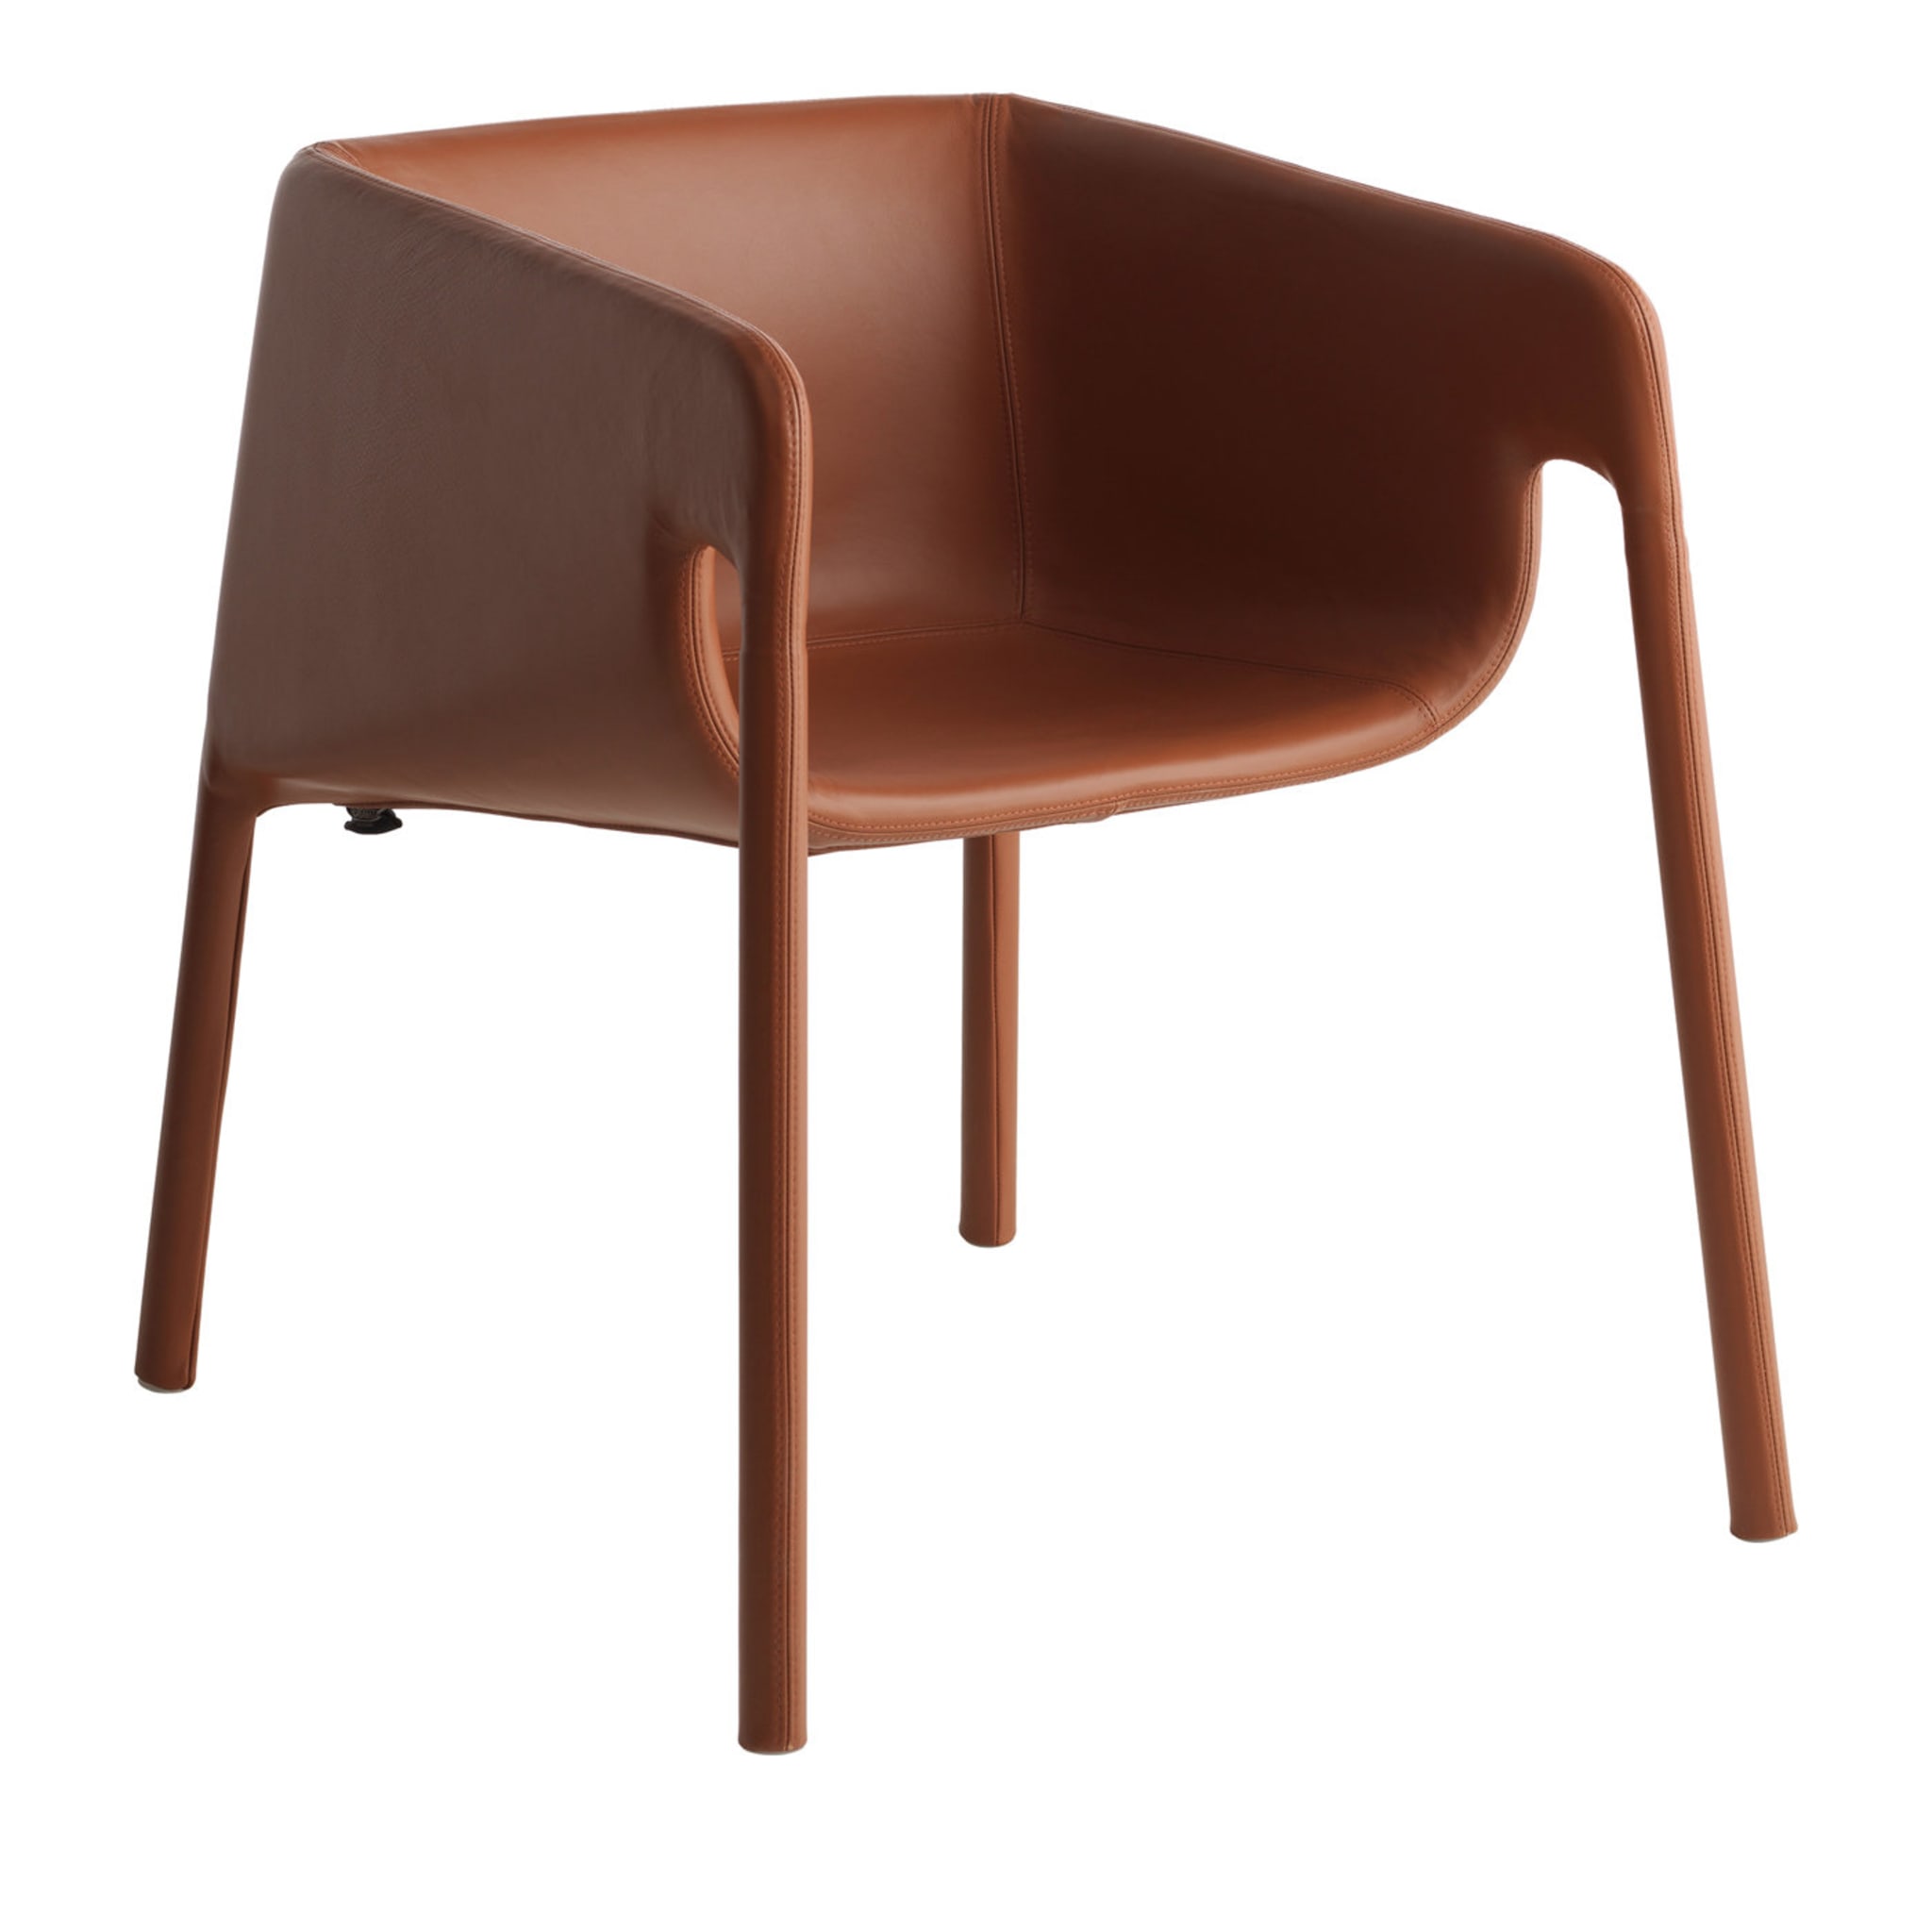 Lobby Brown Leather Chair by StokkeAustad - Main view